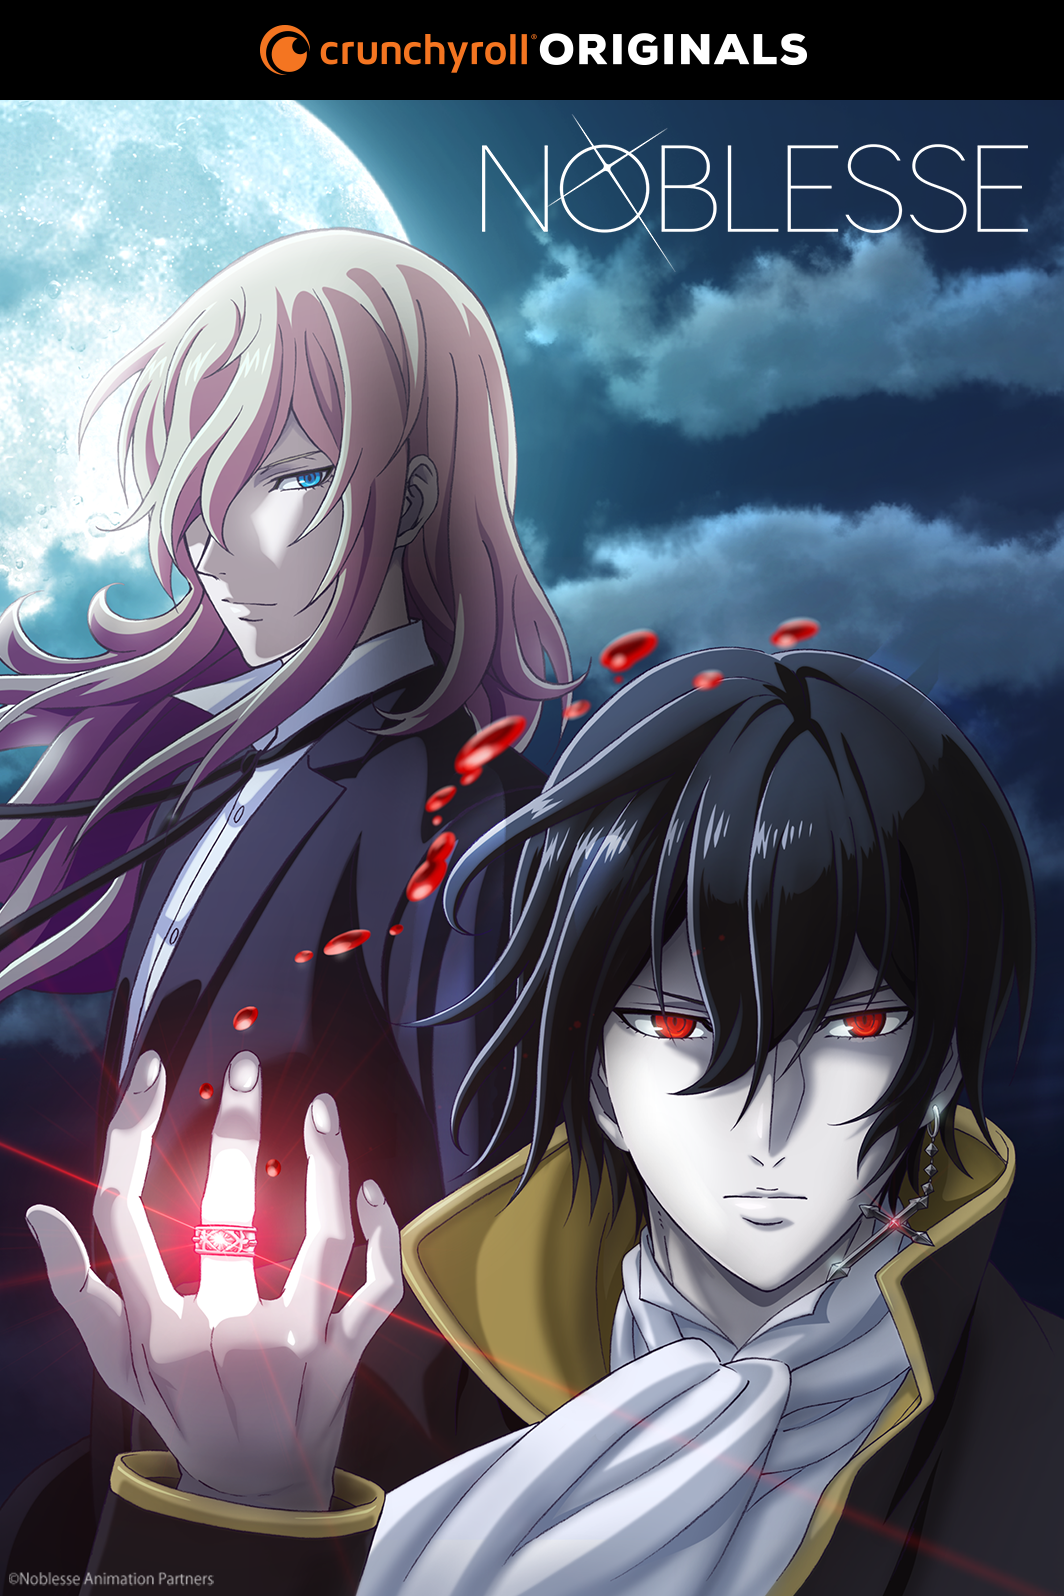 noblesse animes ep 2